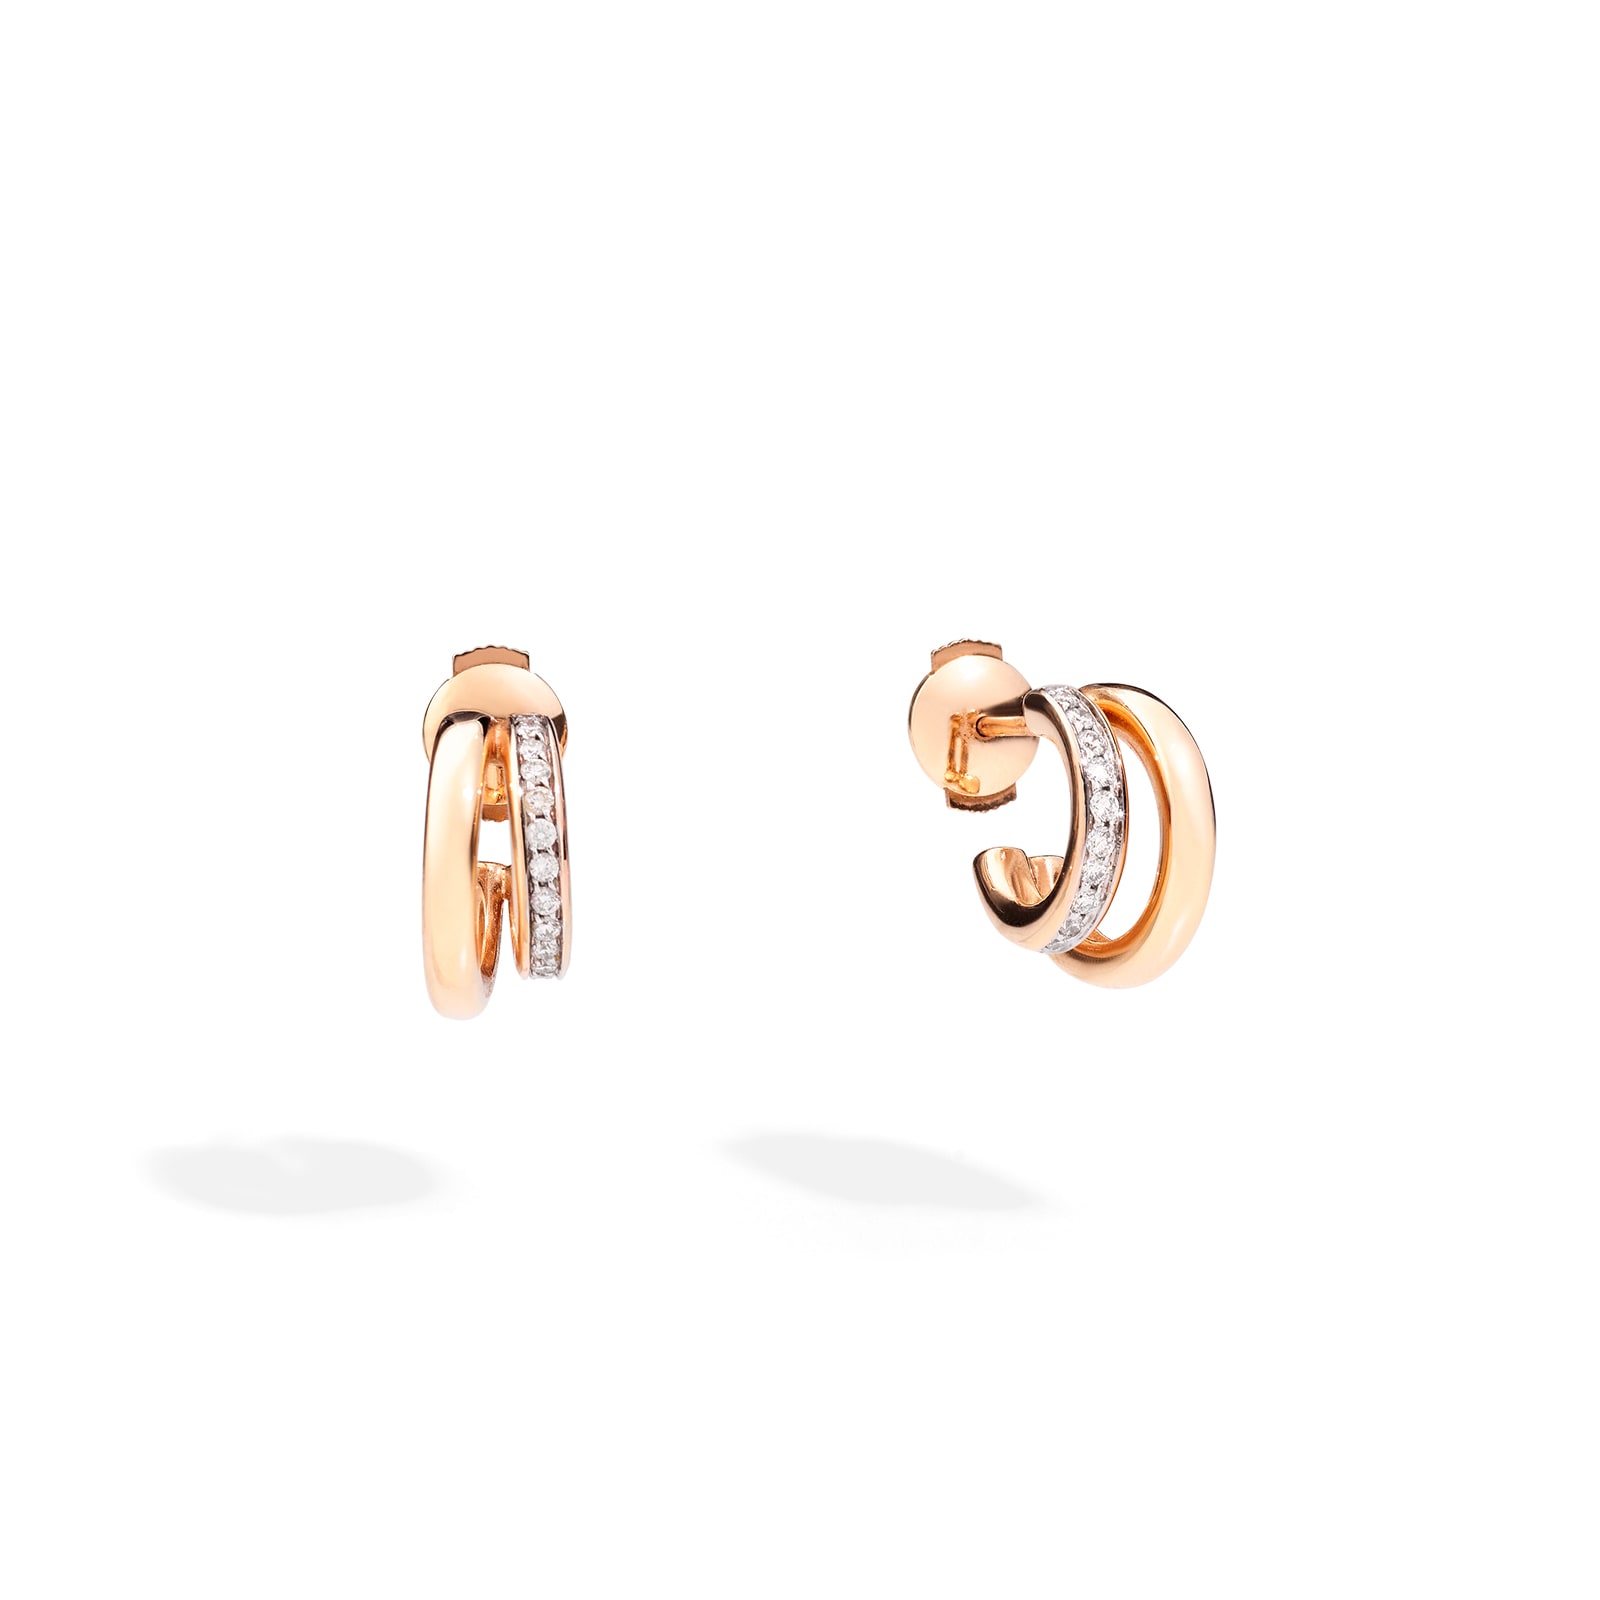 Together 18ct Rose Gold 0.40ct Diamond Earrings